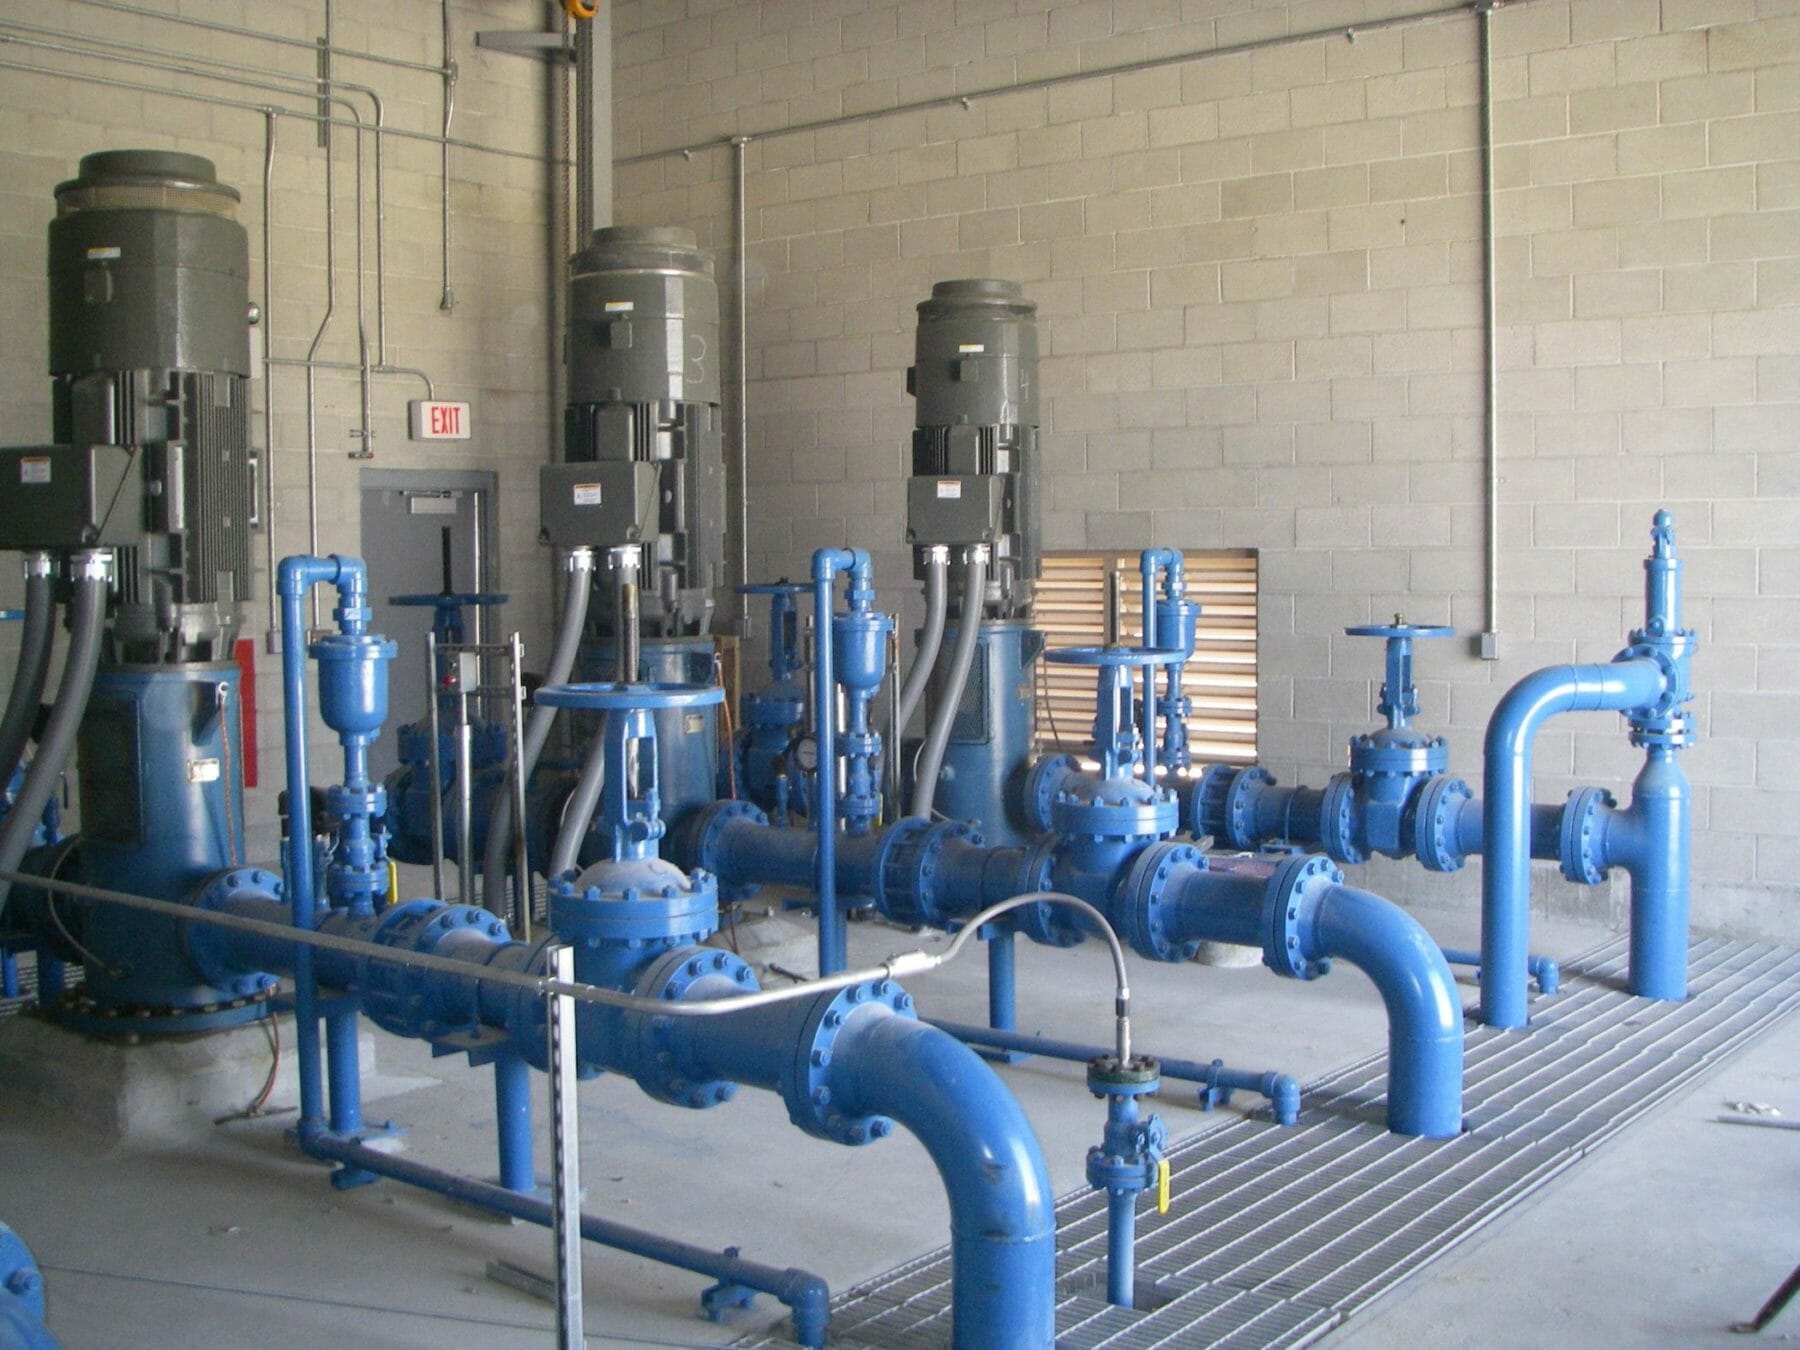 Blue Valved Piping | Industrial Plant Construction Contractors | Wollam Construction